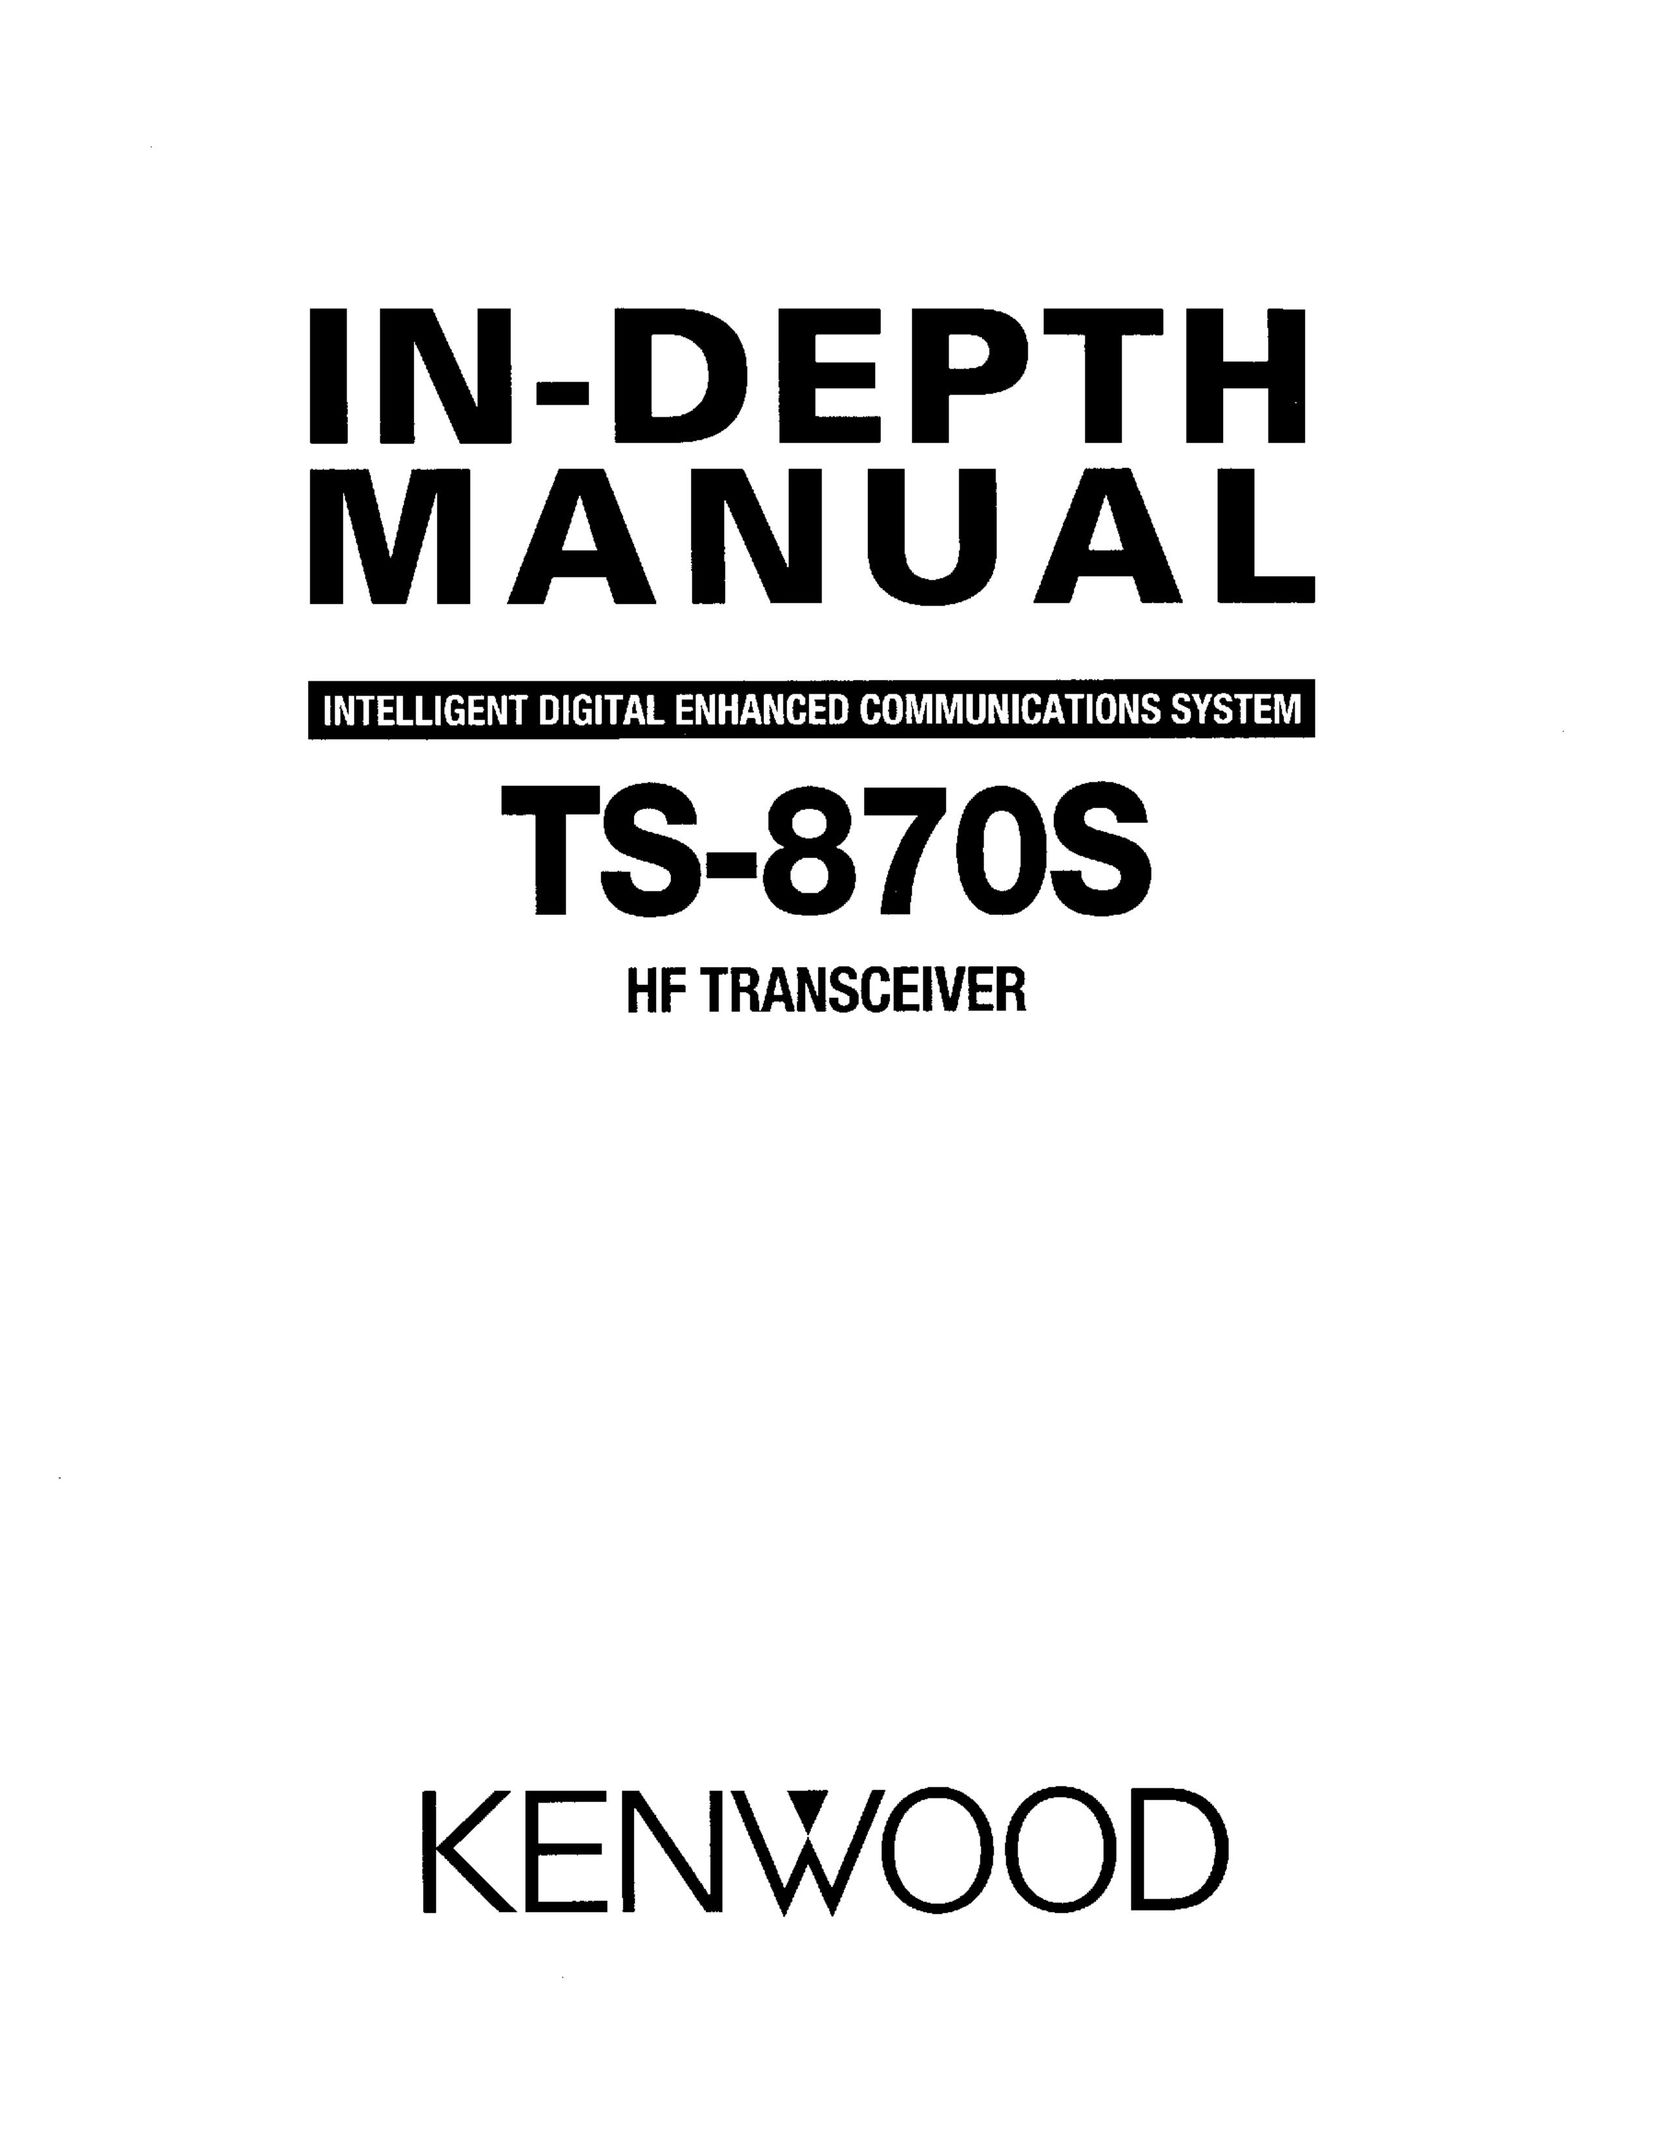 Kenwood TS-870S Home Security System User Manual